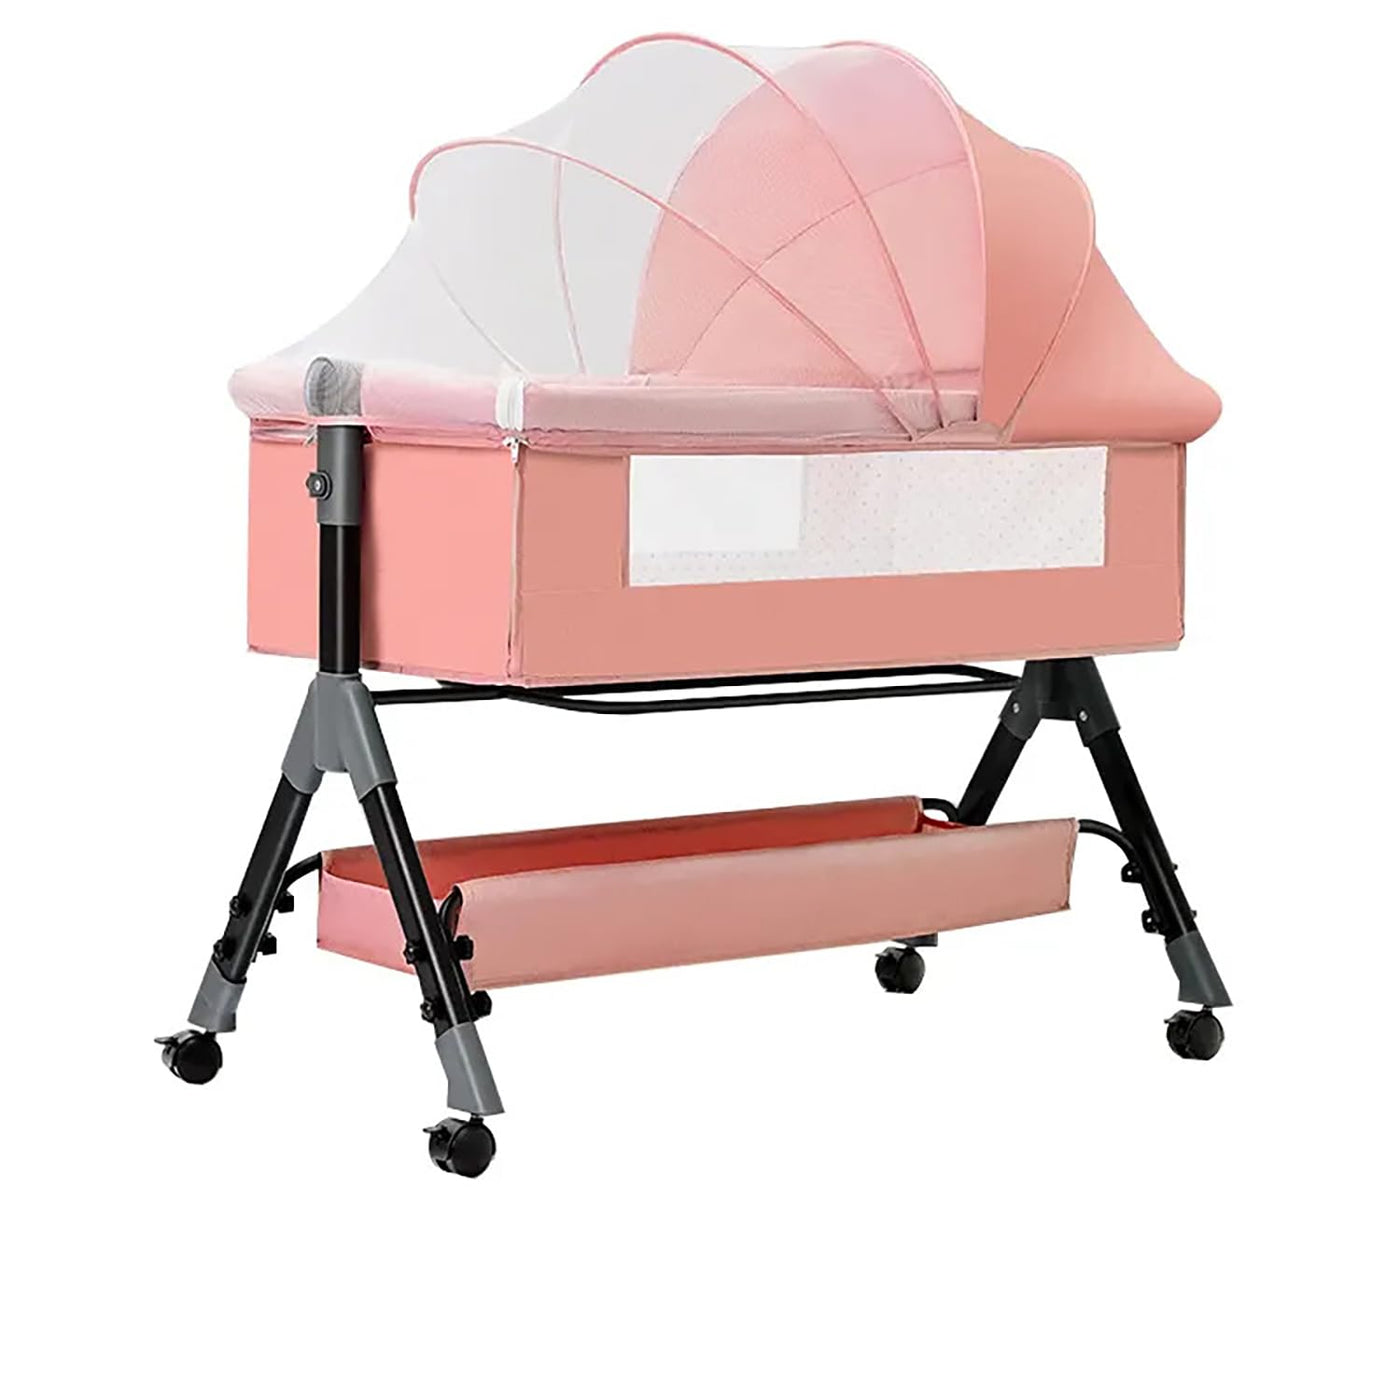 3 in 1 Baby Bed Portable Bassinet for Newborn Infant Baby with Storage Basket